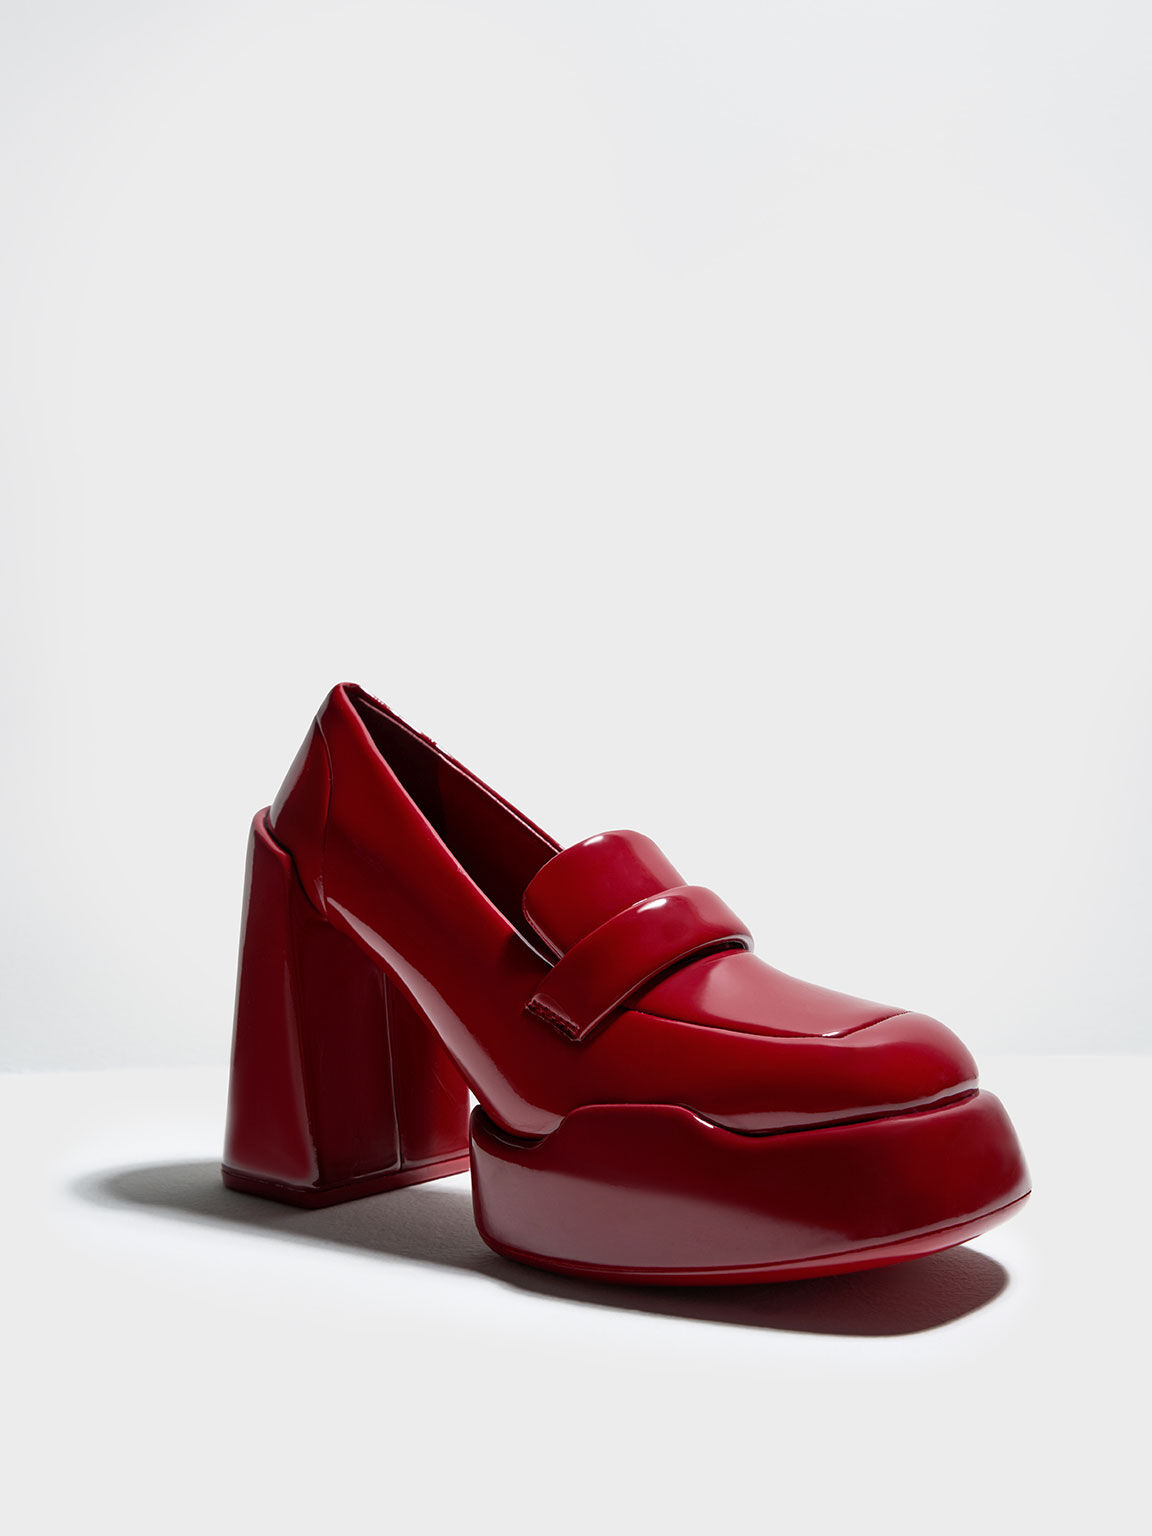 Lula Patent Loafer Pumps Charles & Keith